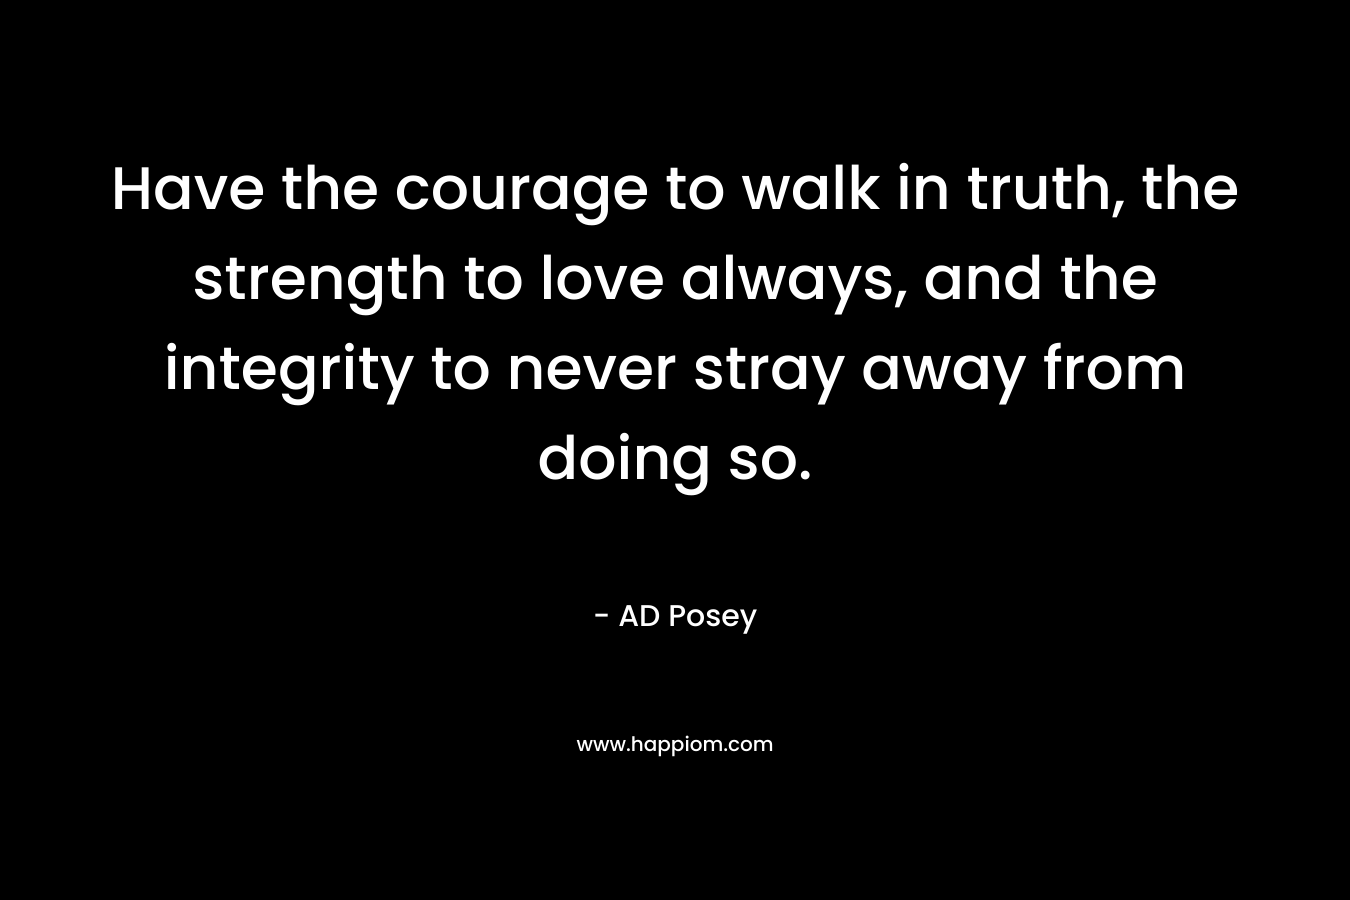 Have the courage to walk in truth, the strength to love always, and the integrity to never stray away from doing so.